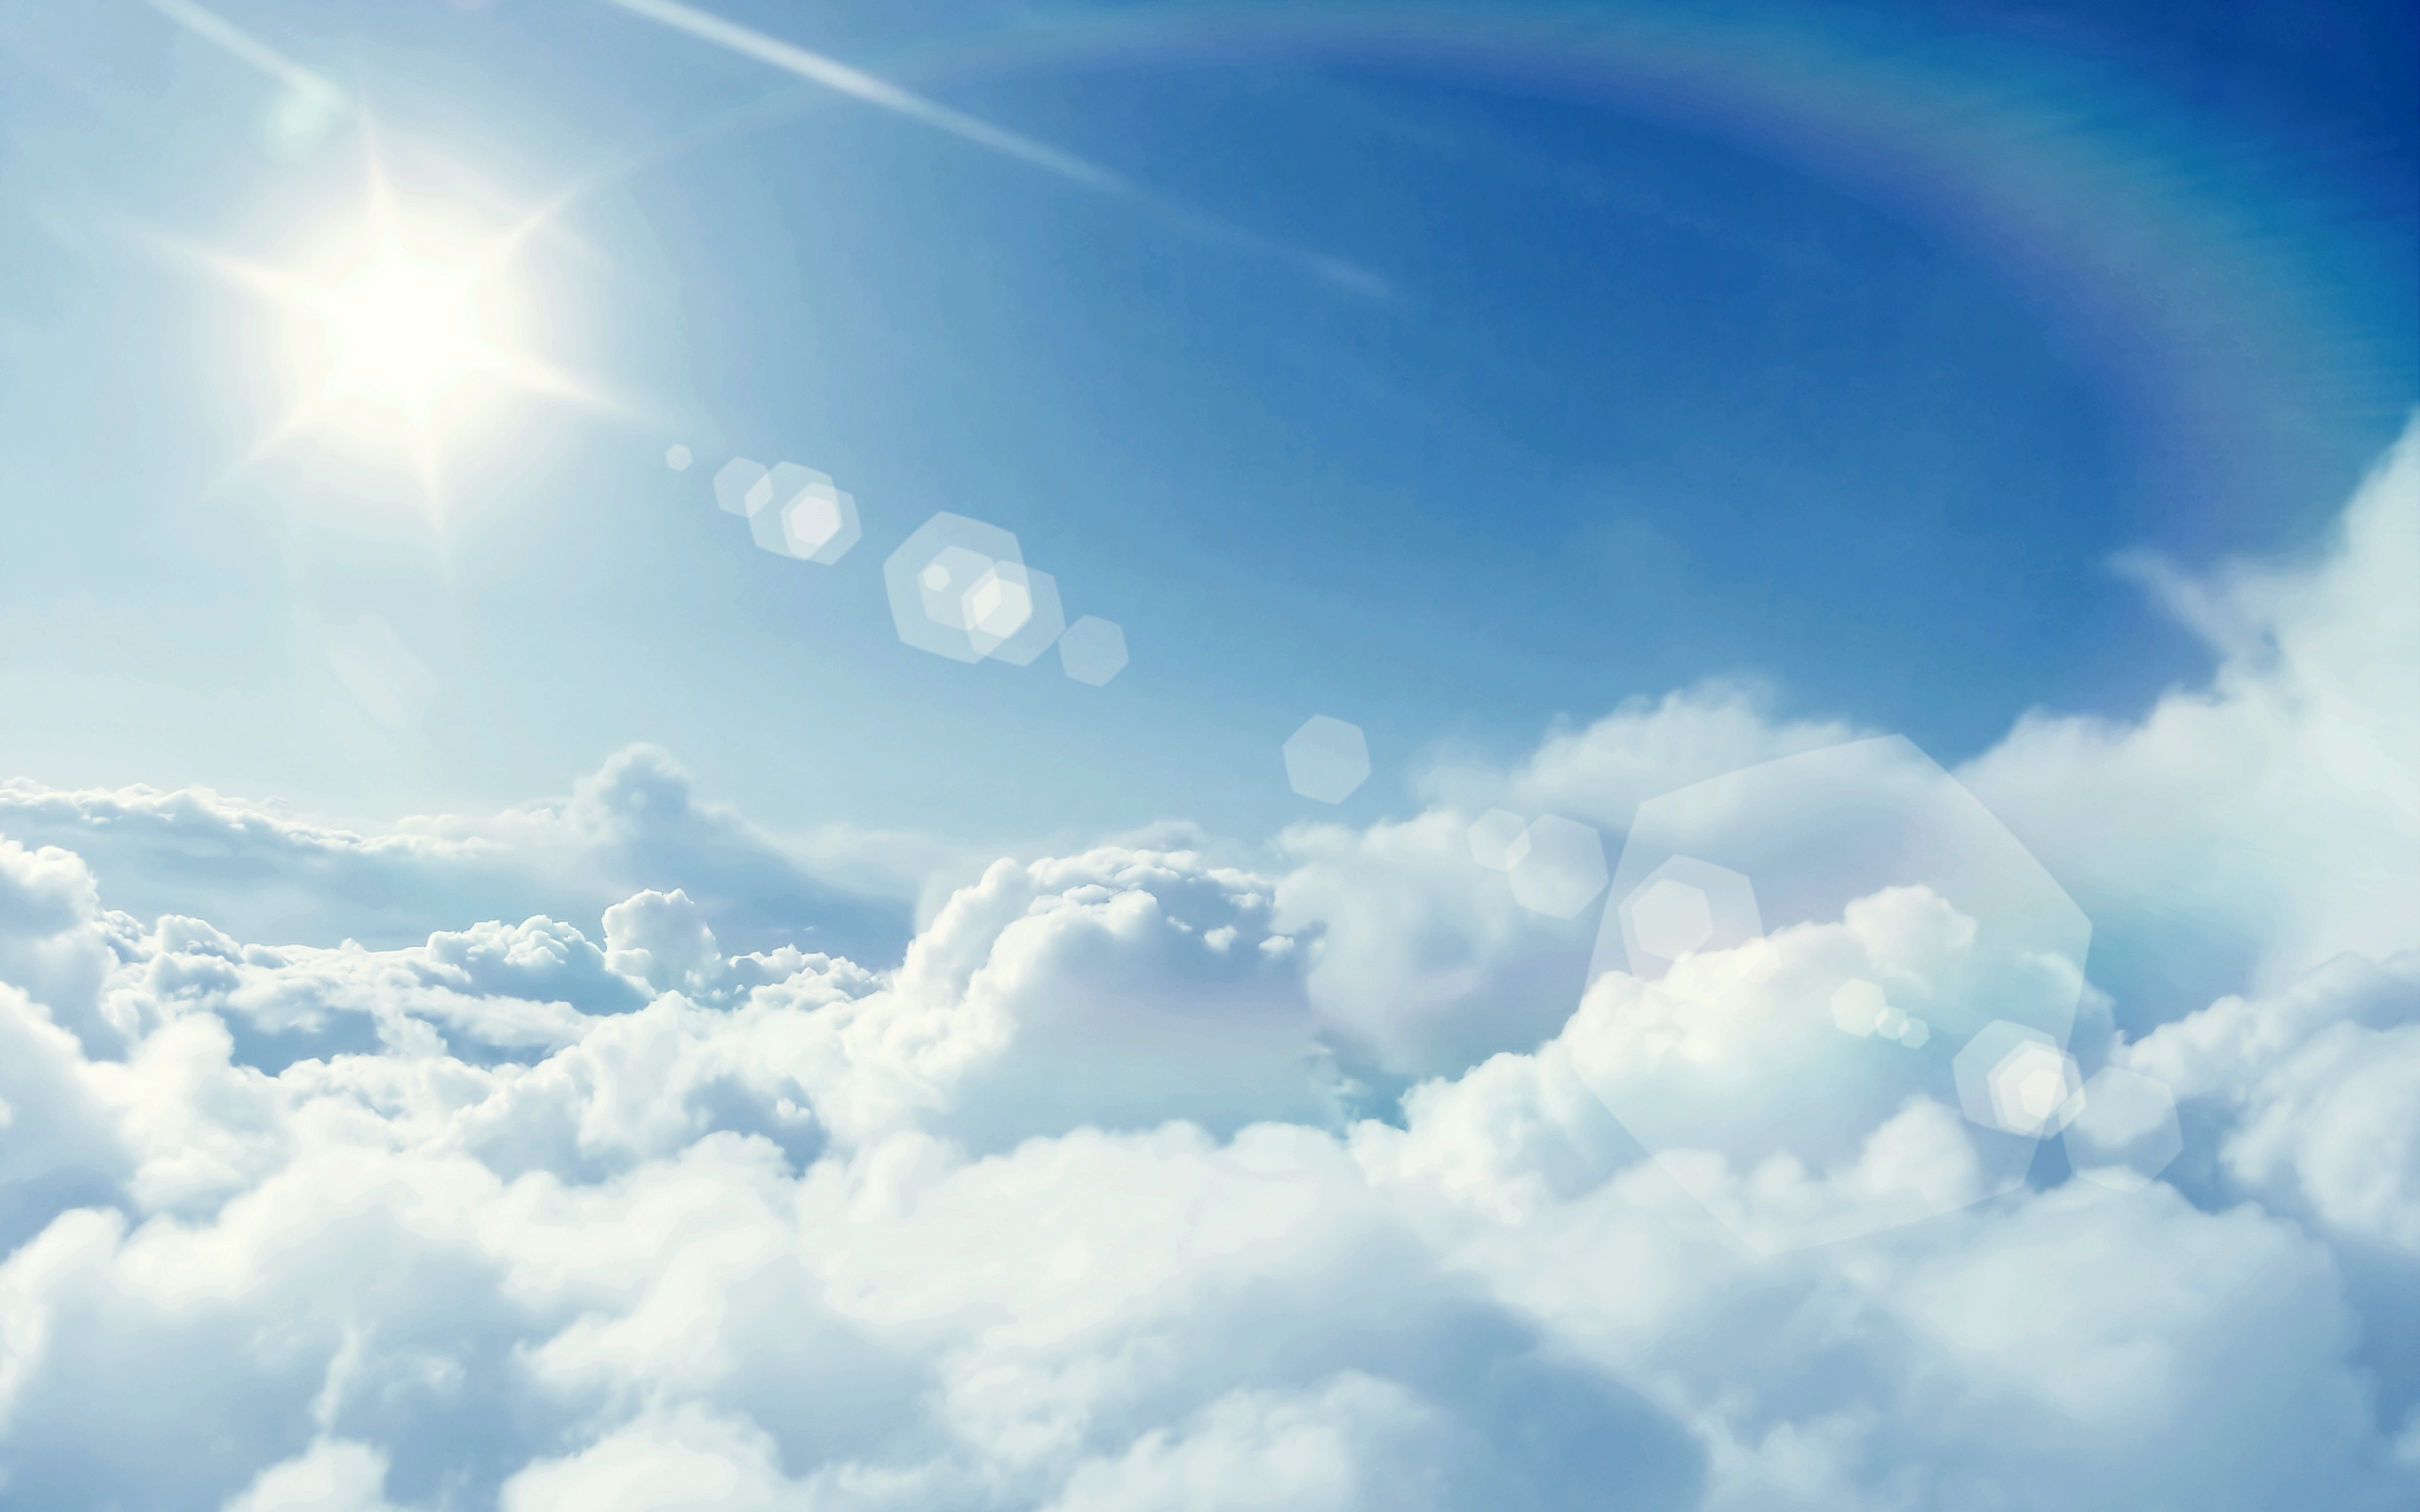 Astonishing Above The Clouds Wallpaper Xpx 2560x1600px